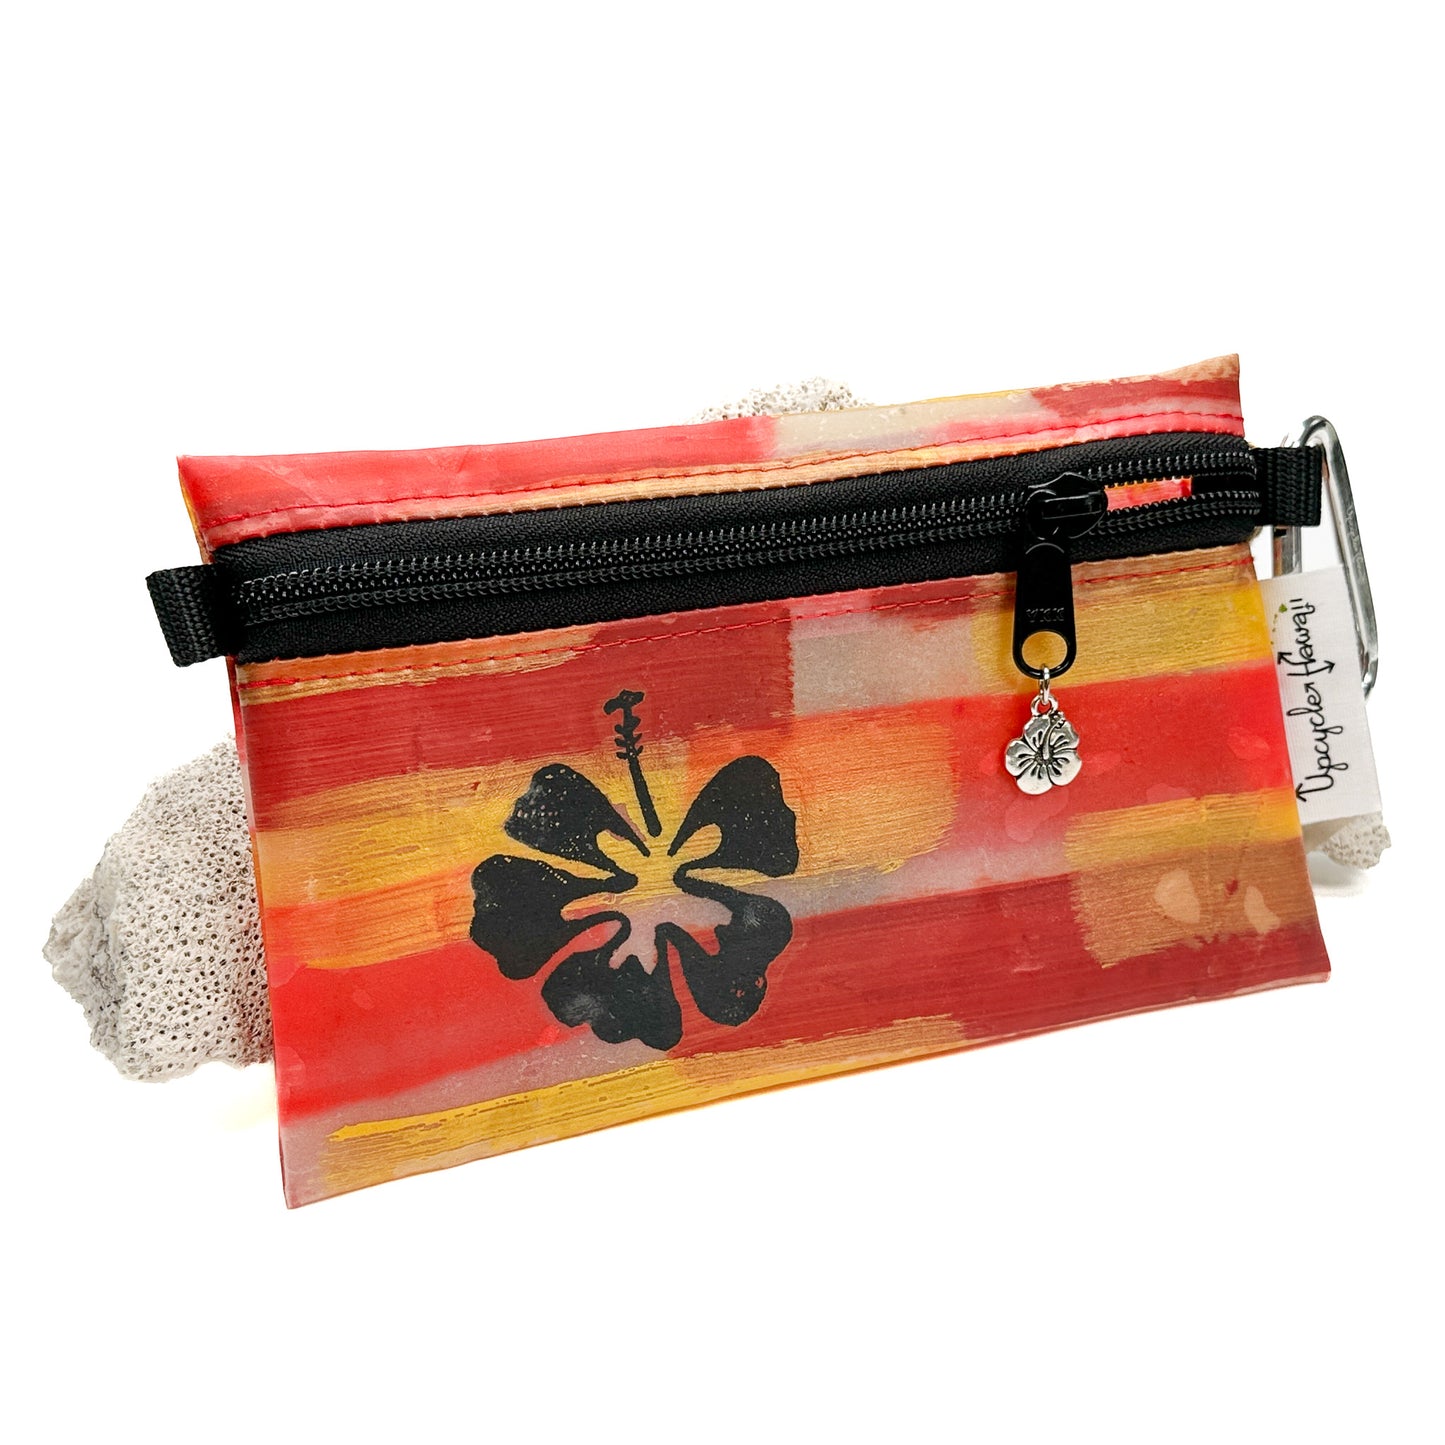 MADE IN HAWAII Recycled Plastic Zip Pouch with Charm (5 Color Options) - 1 pc.-The Bead Gallery Honolulu